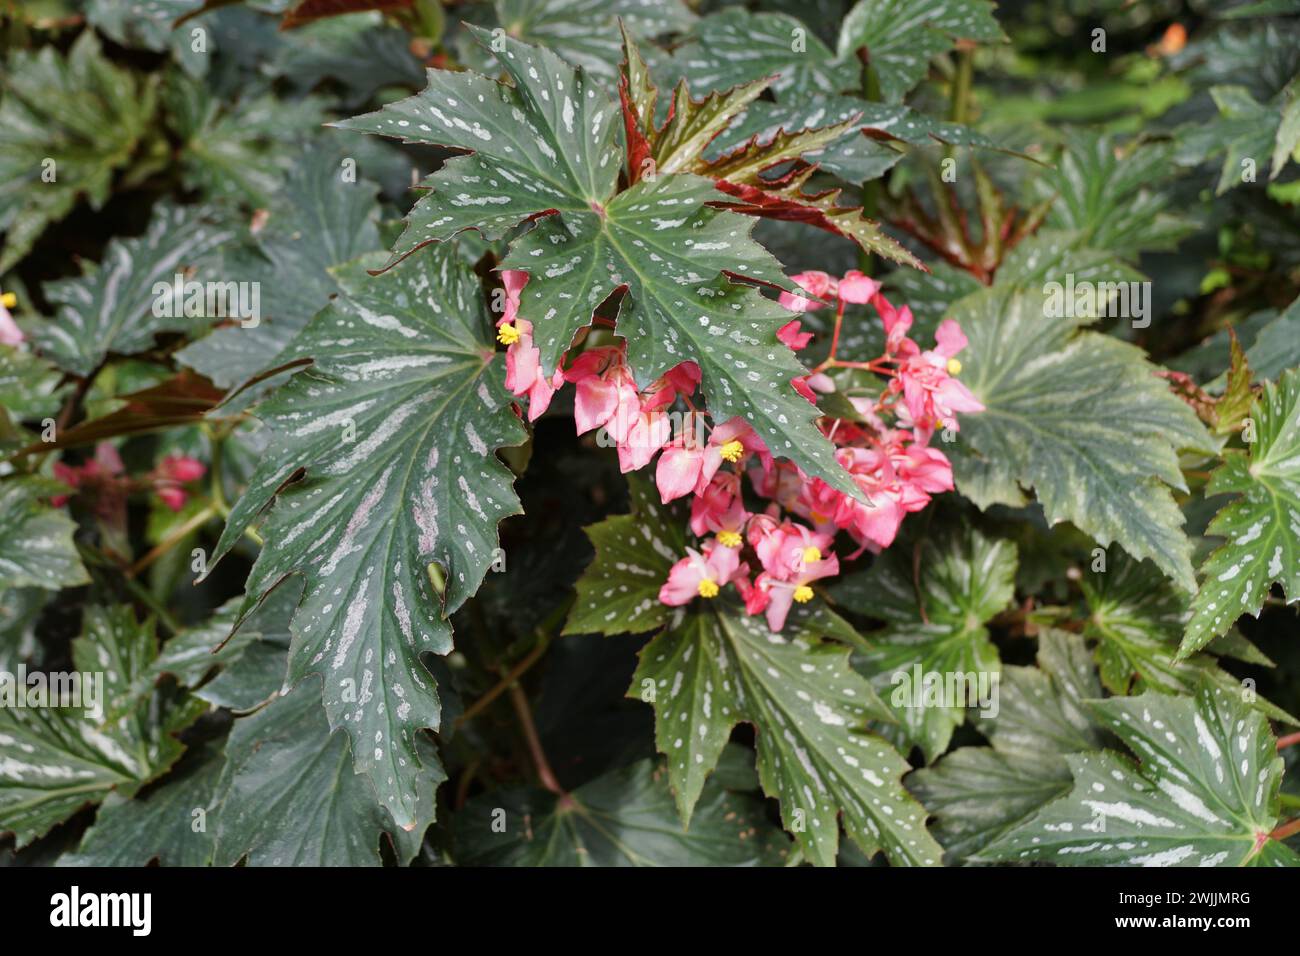 Beautiful and unique shape of Cane-like Begonia 'Lana' leaves with pink flowers Stock Photo